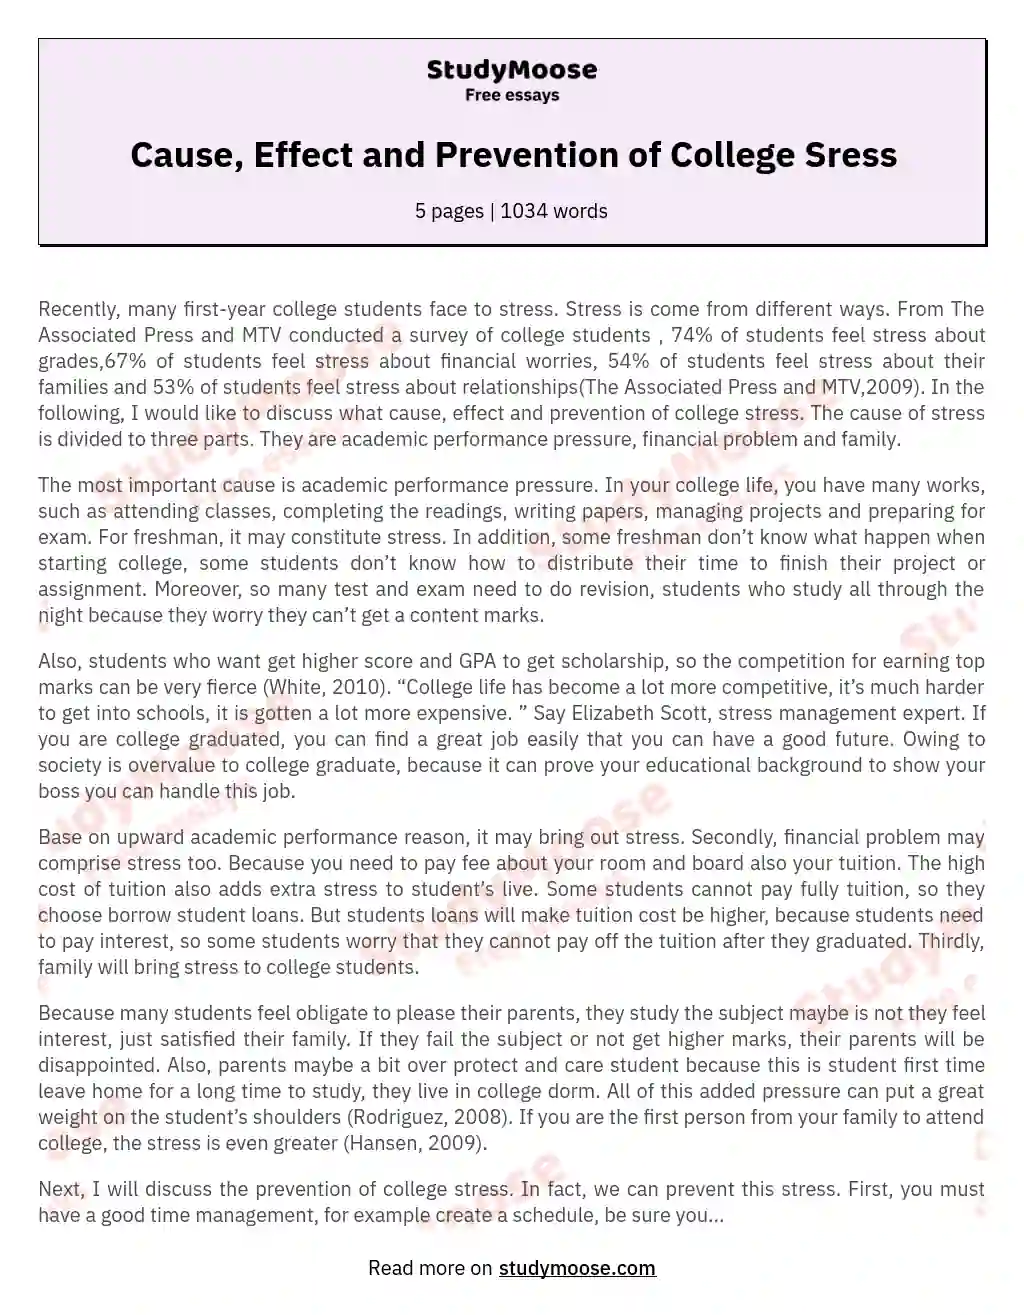 Cause, Effect and Prevention of College Sress essay